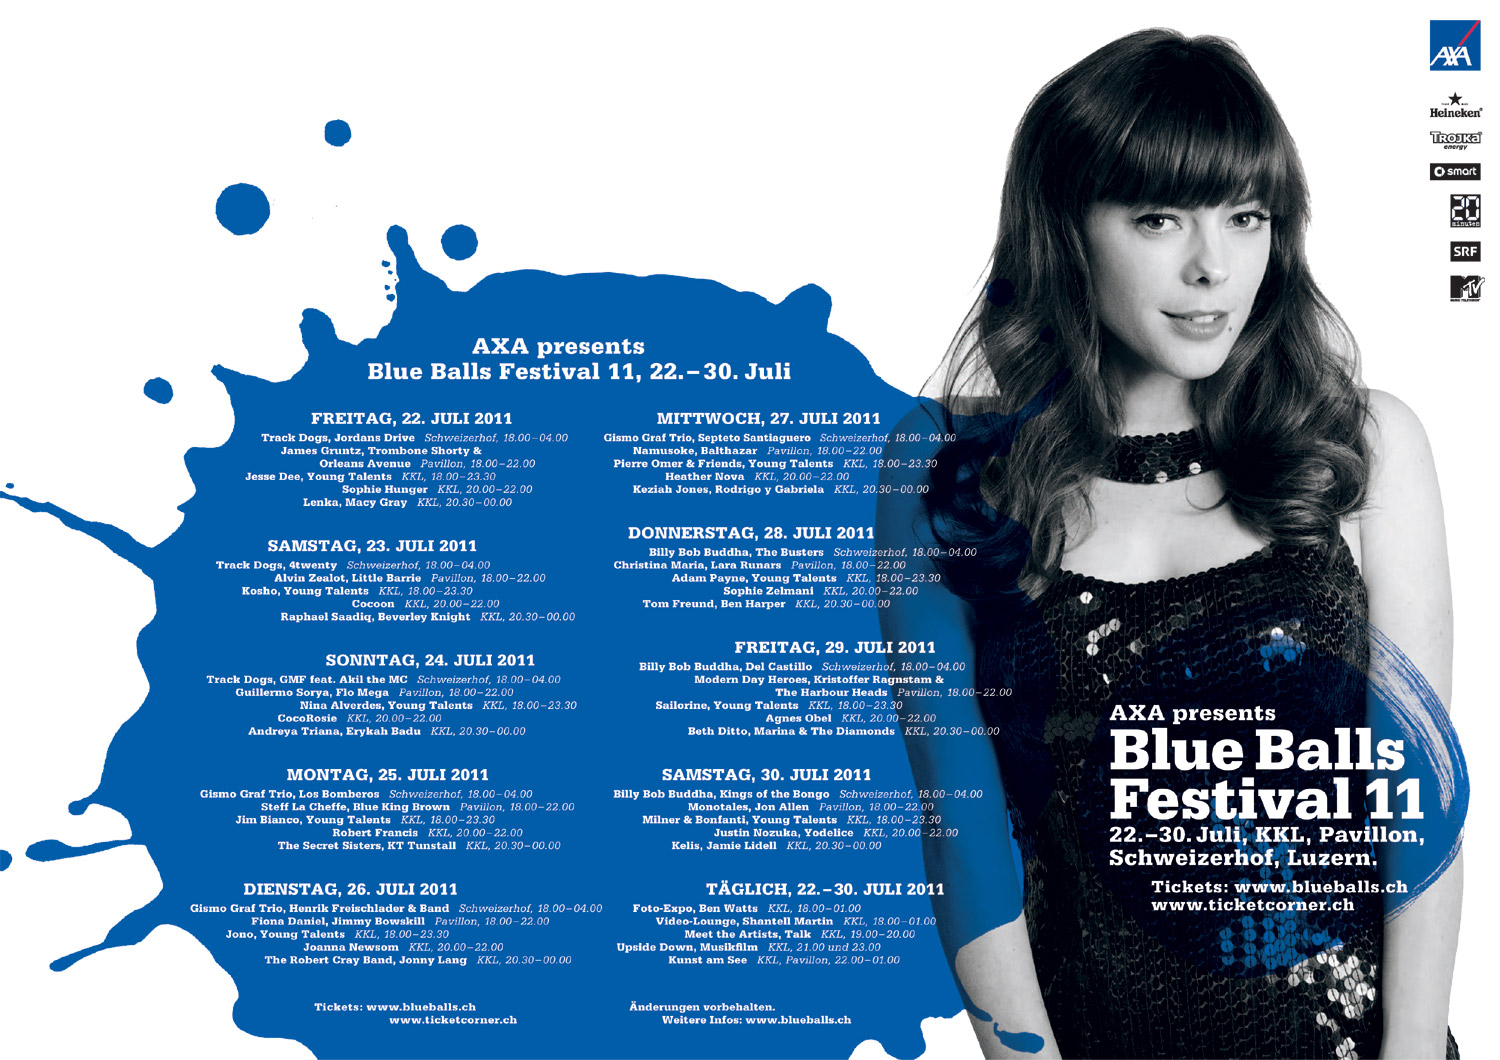 There is a Blue Balls festival in Switzerland. I'm not sure if I want